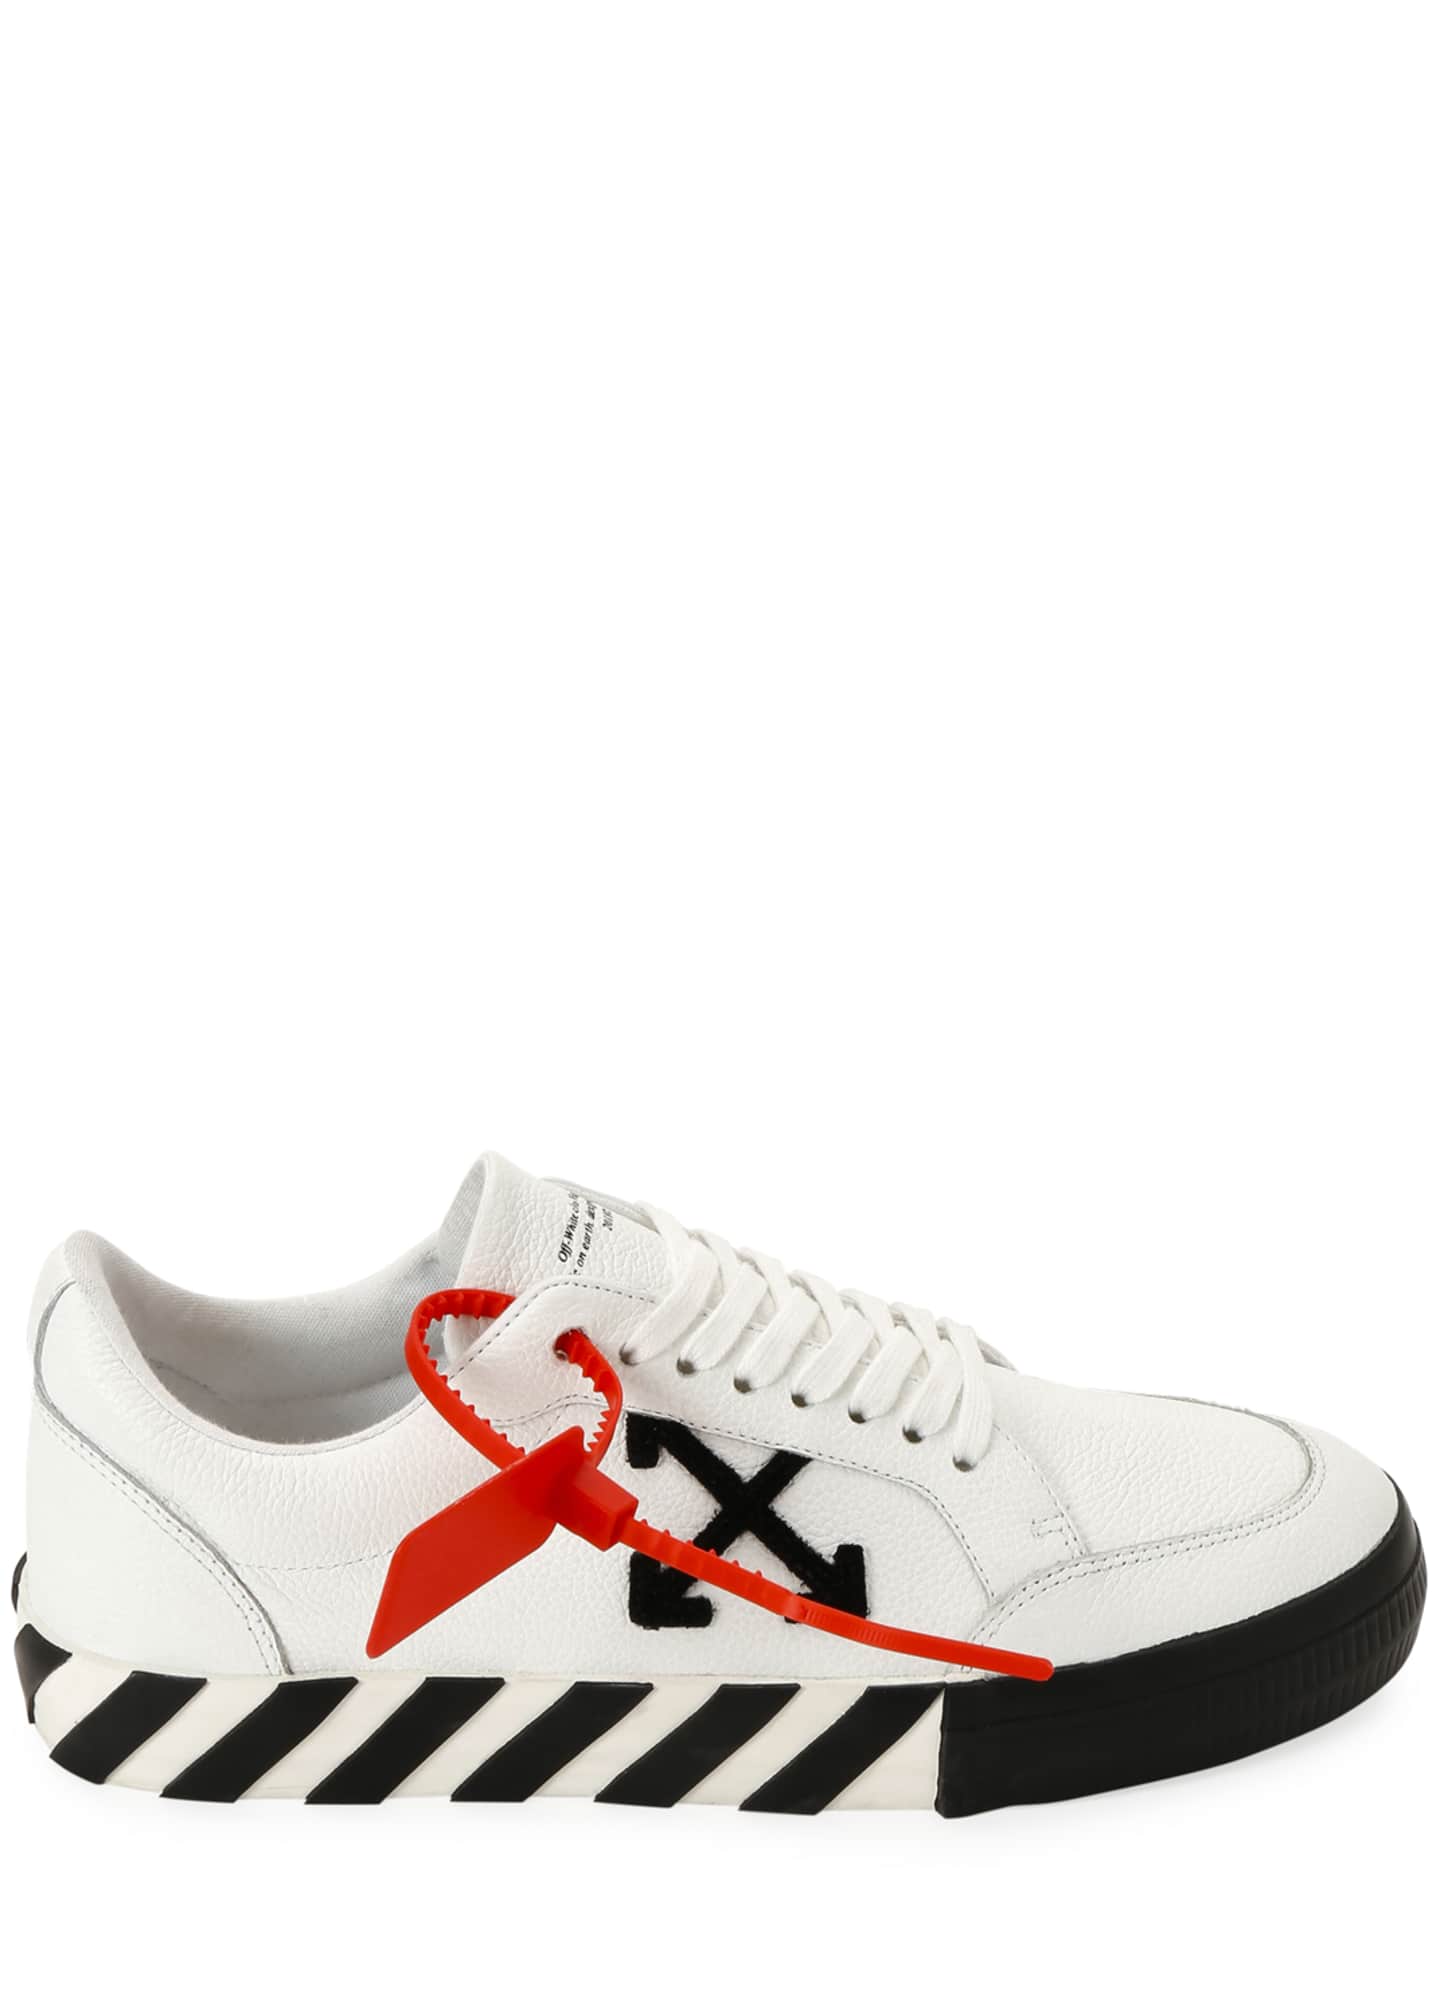 Off-White Men's Arrow Leather Sneakers with Stripes - Bergdorf Goodman